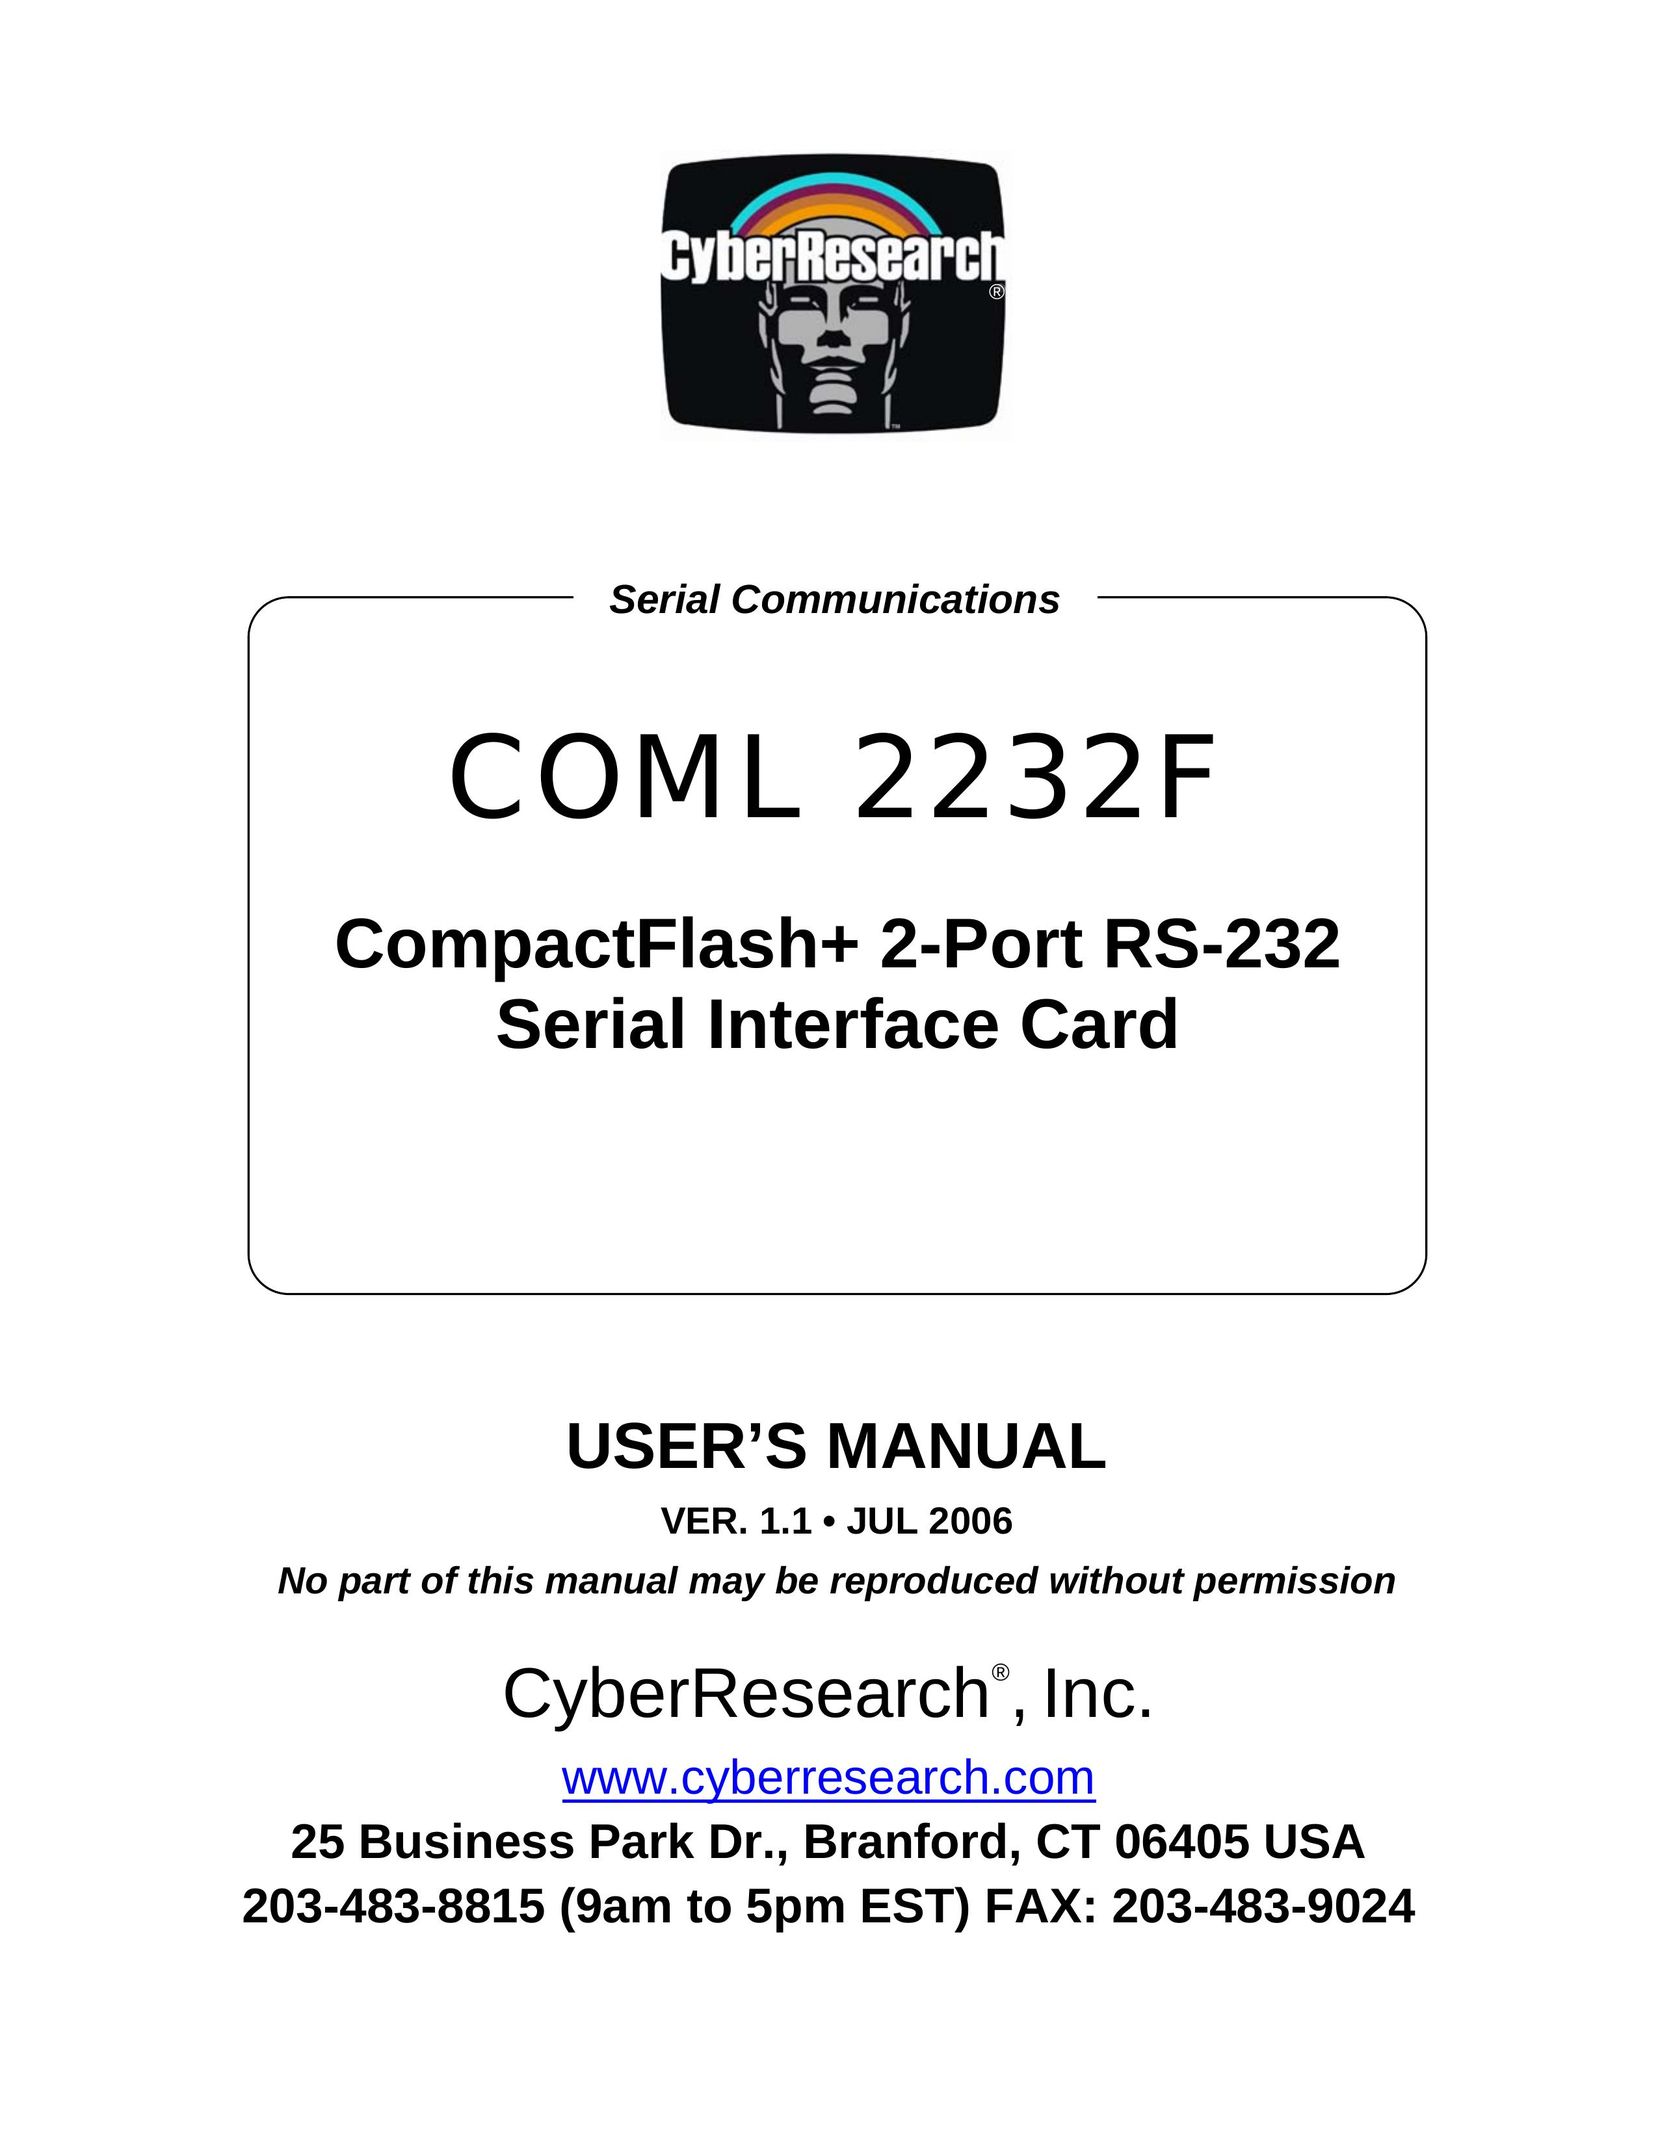 CyberResearch COML 2232F Power Supply User Manual